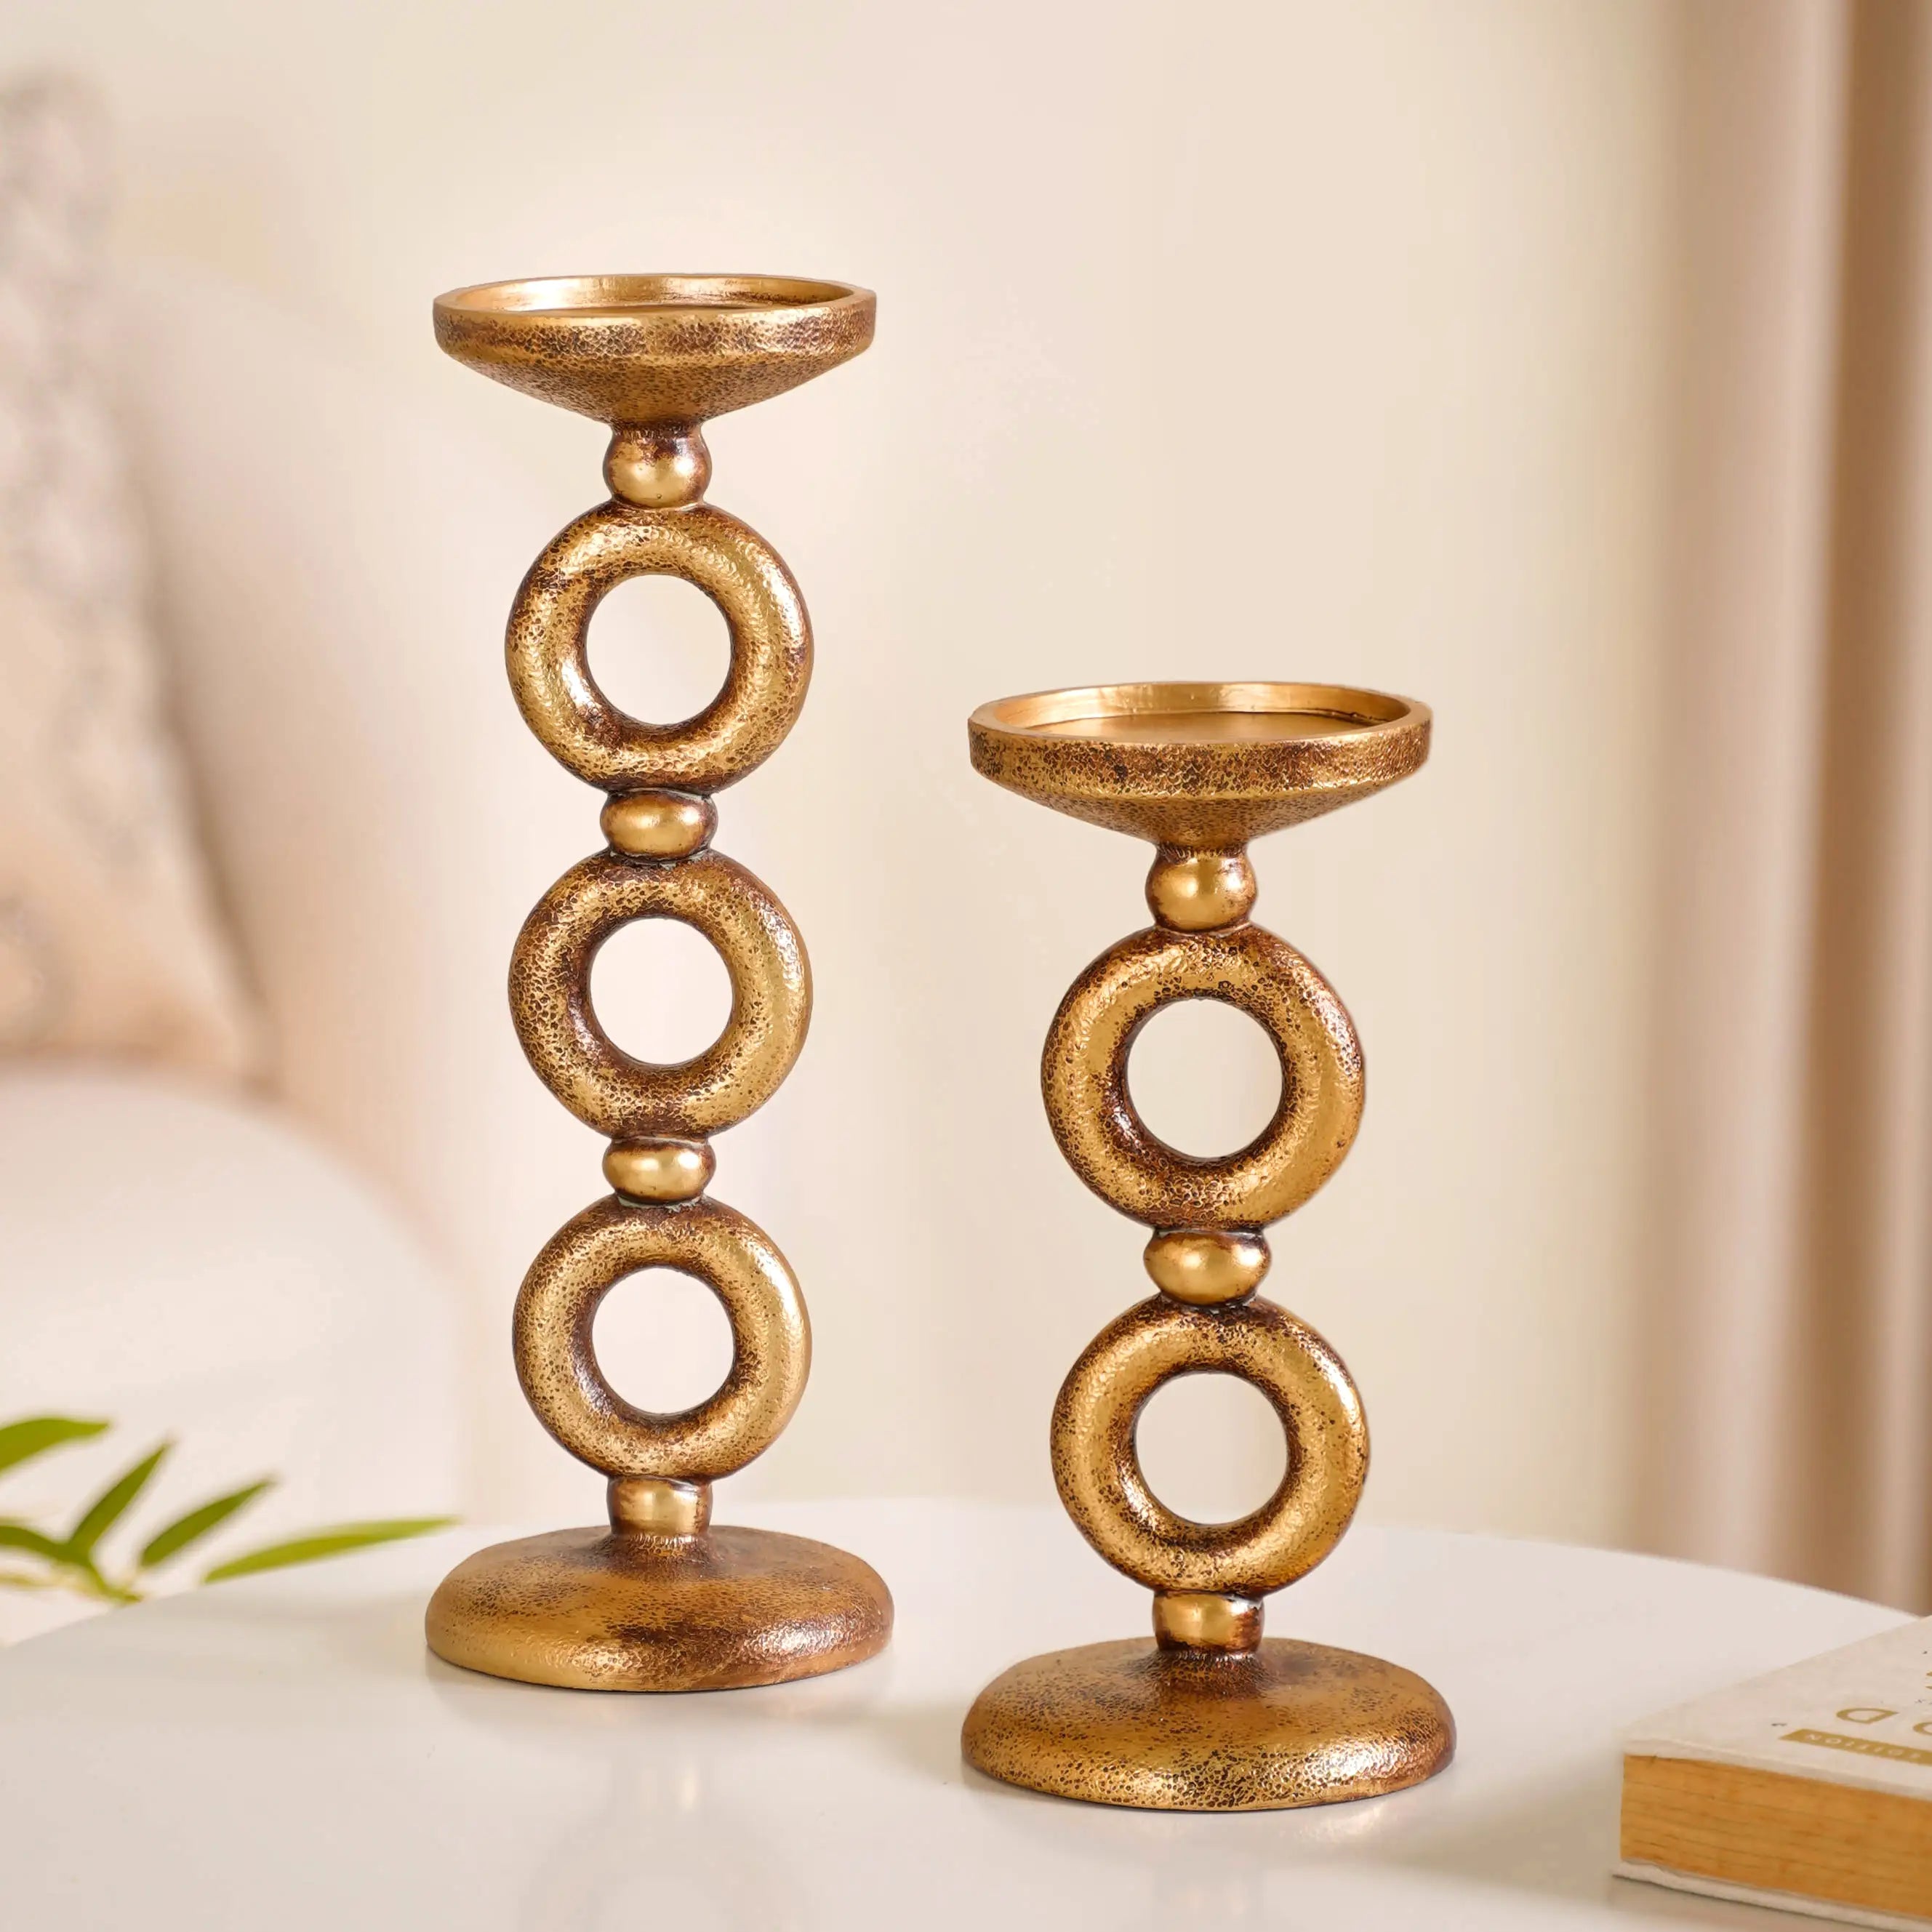 Candle Holder - Buy Resin Candle Stand Online for Home Decor